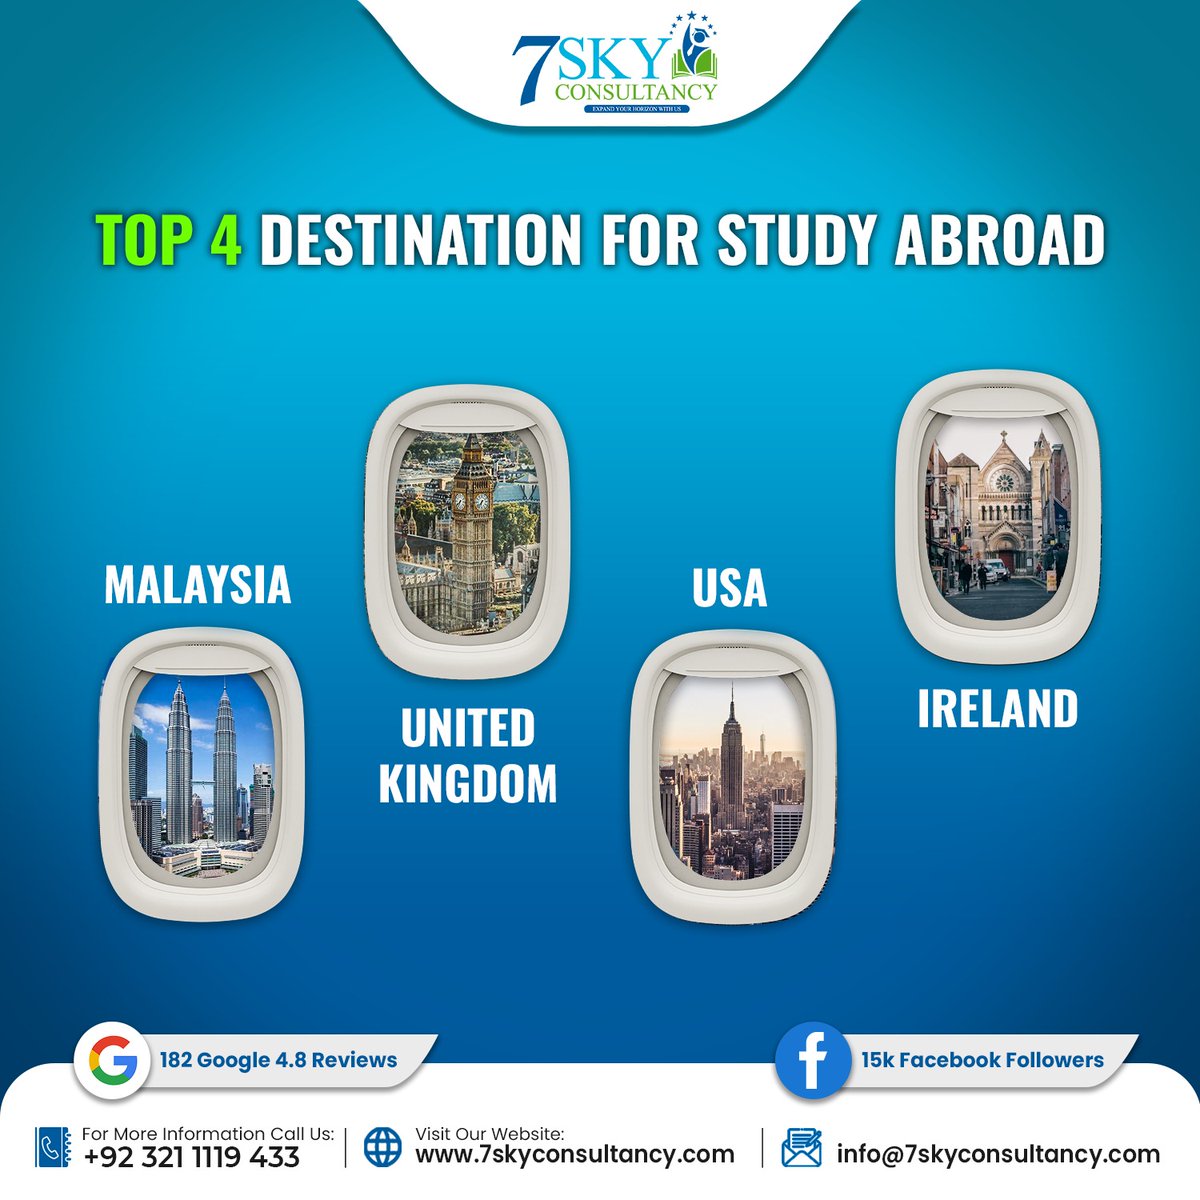 🌍Top 4 Study Abroad Destination. Follow @7skyconsultancy for Study Abroad Updates.